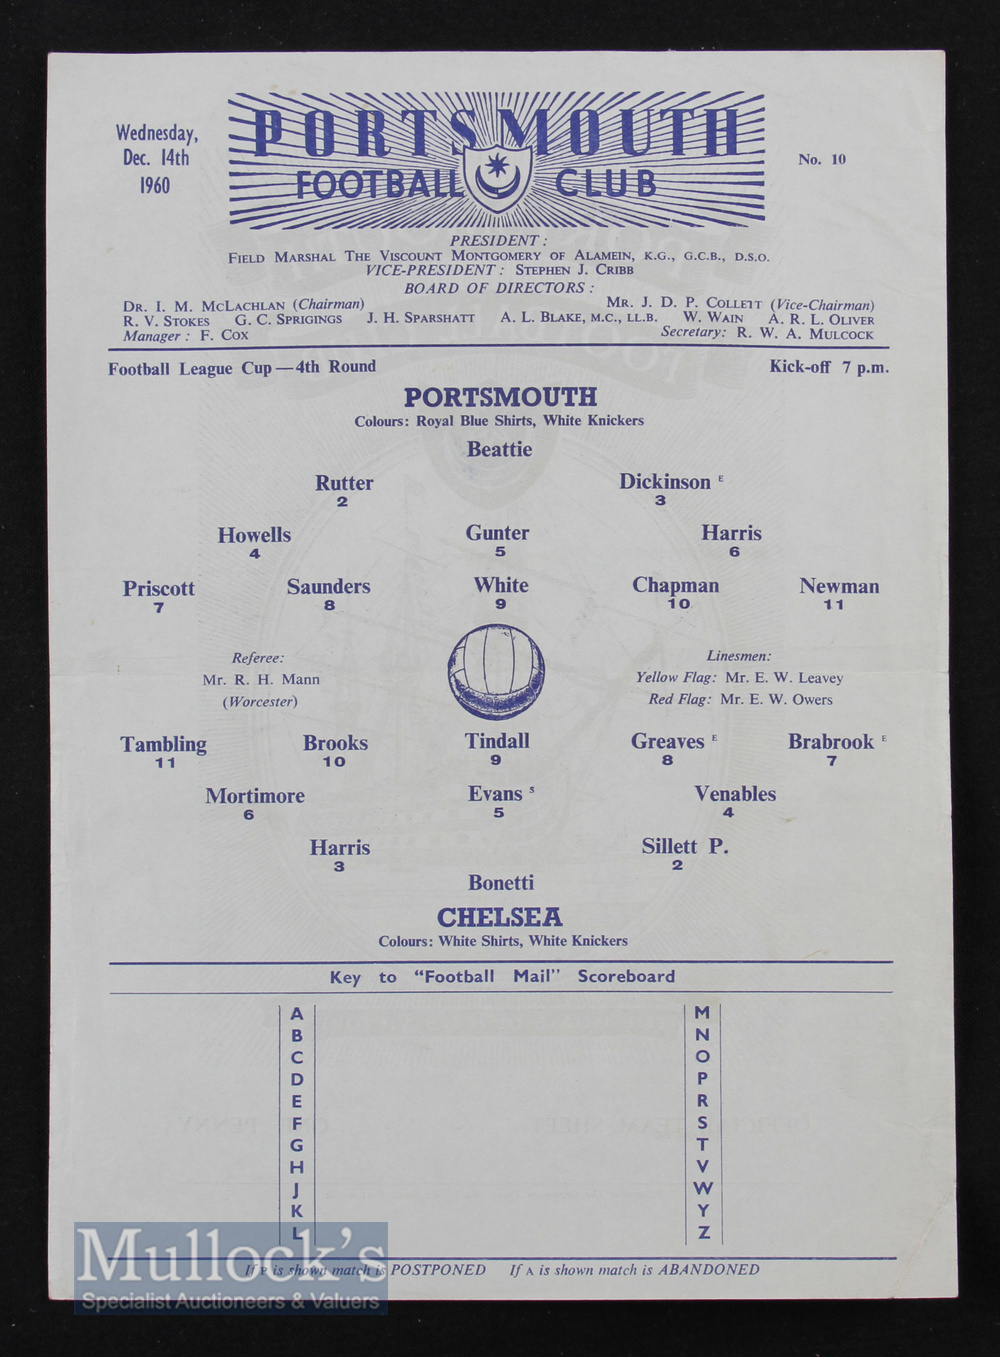 1960/61 Portsmouth v Chelsea Football League Cup match programme 14 December 1960 at Fratton Park,